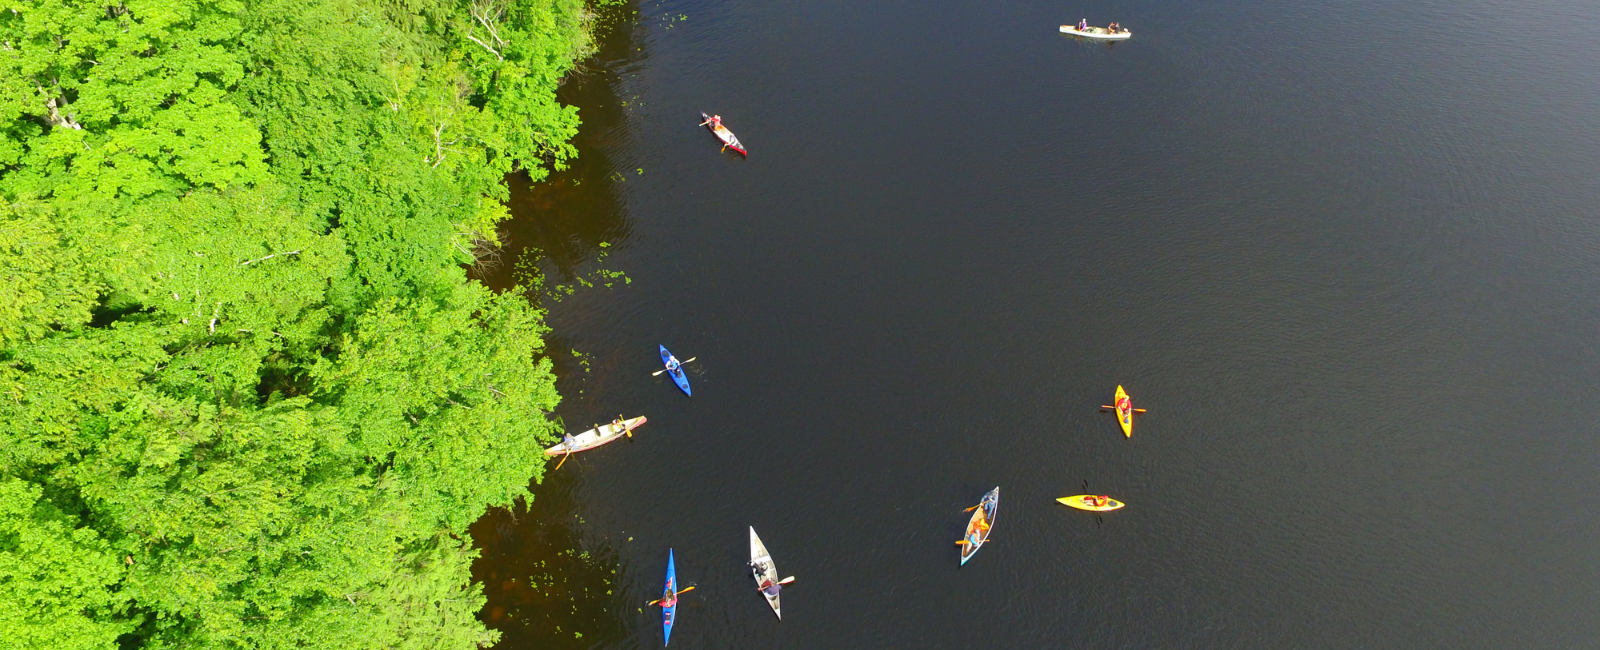 Arial views of canoes and kayaks on Head Lake in Haliburton. Left side of image has vibrant green trees, there are two yellow kayaks, two blue kayaks and three canoes.